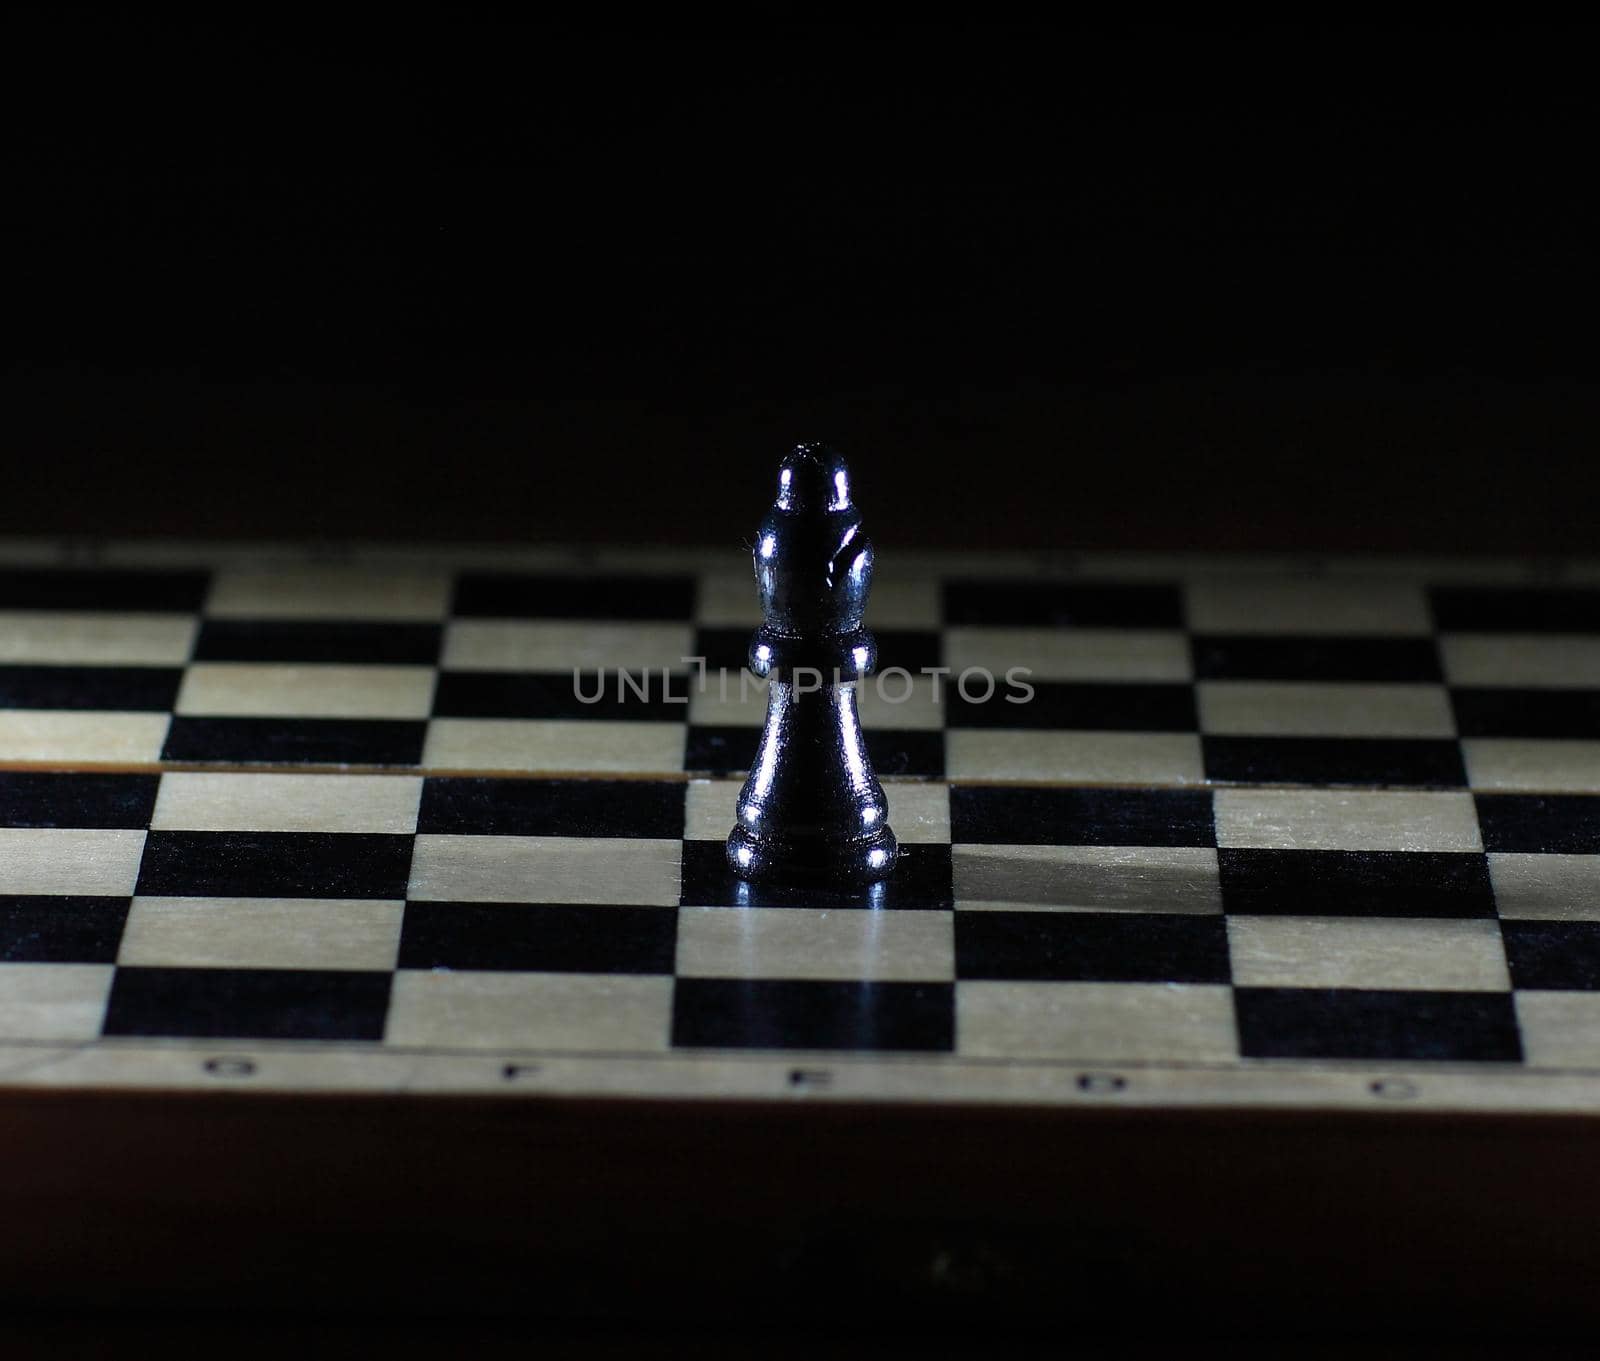 Composition with chessmen on glossy chessboard